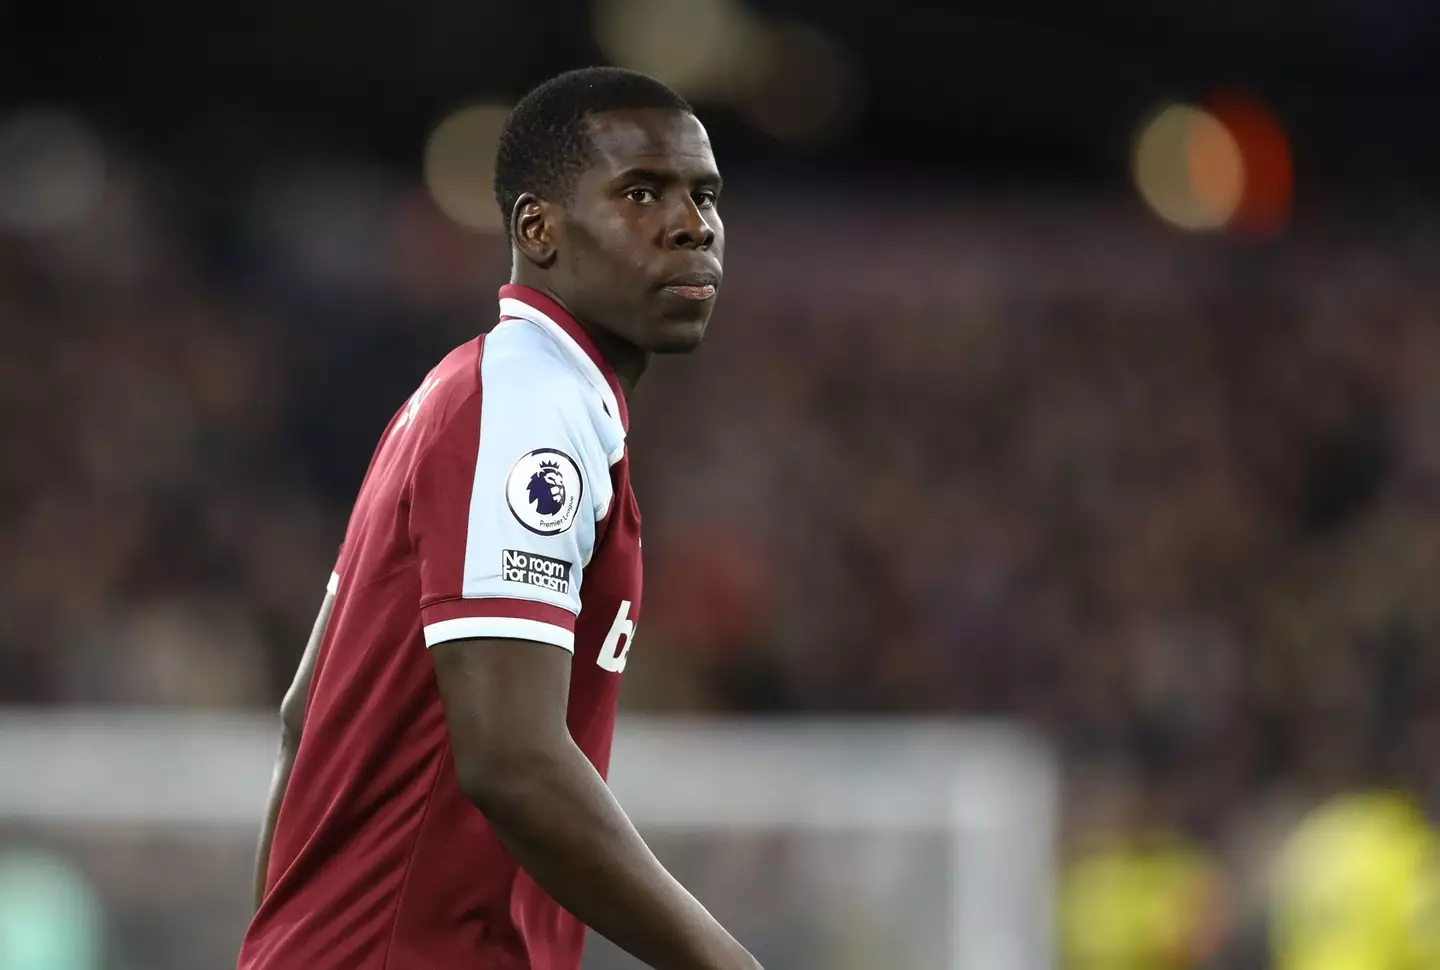 Zouma was allowed to play for West Ham in Tuesday's win over Watford (Image: PA)